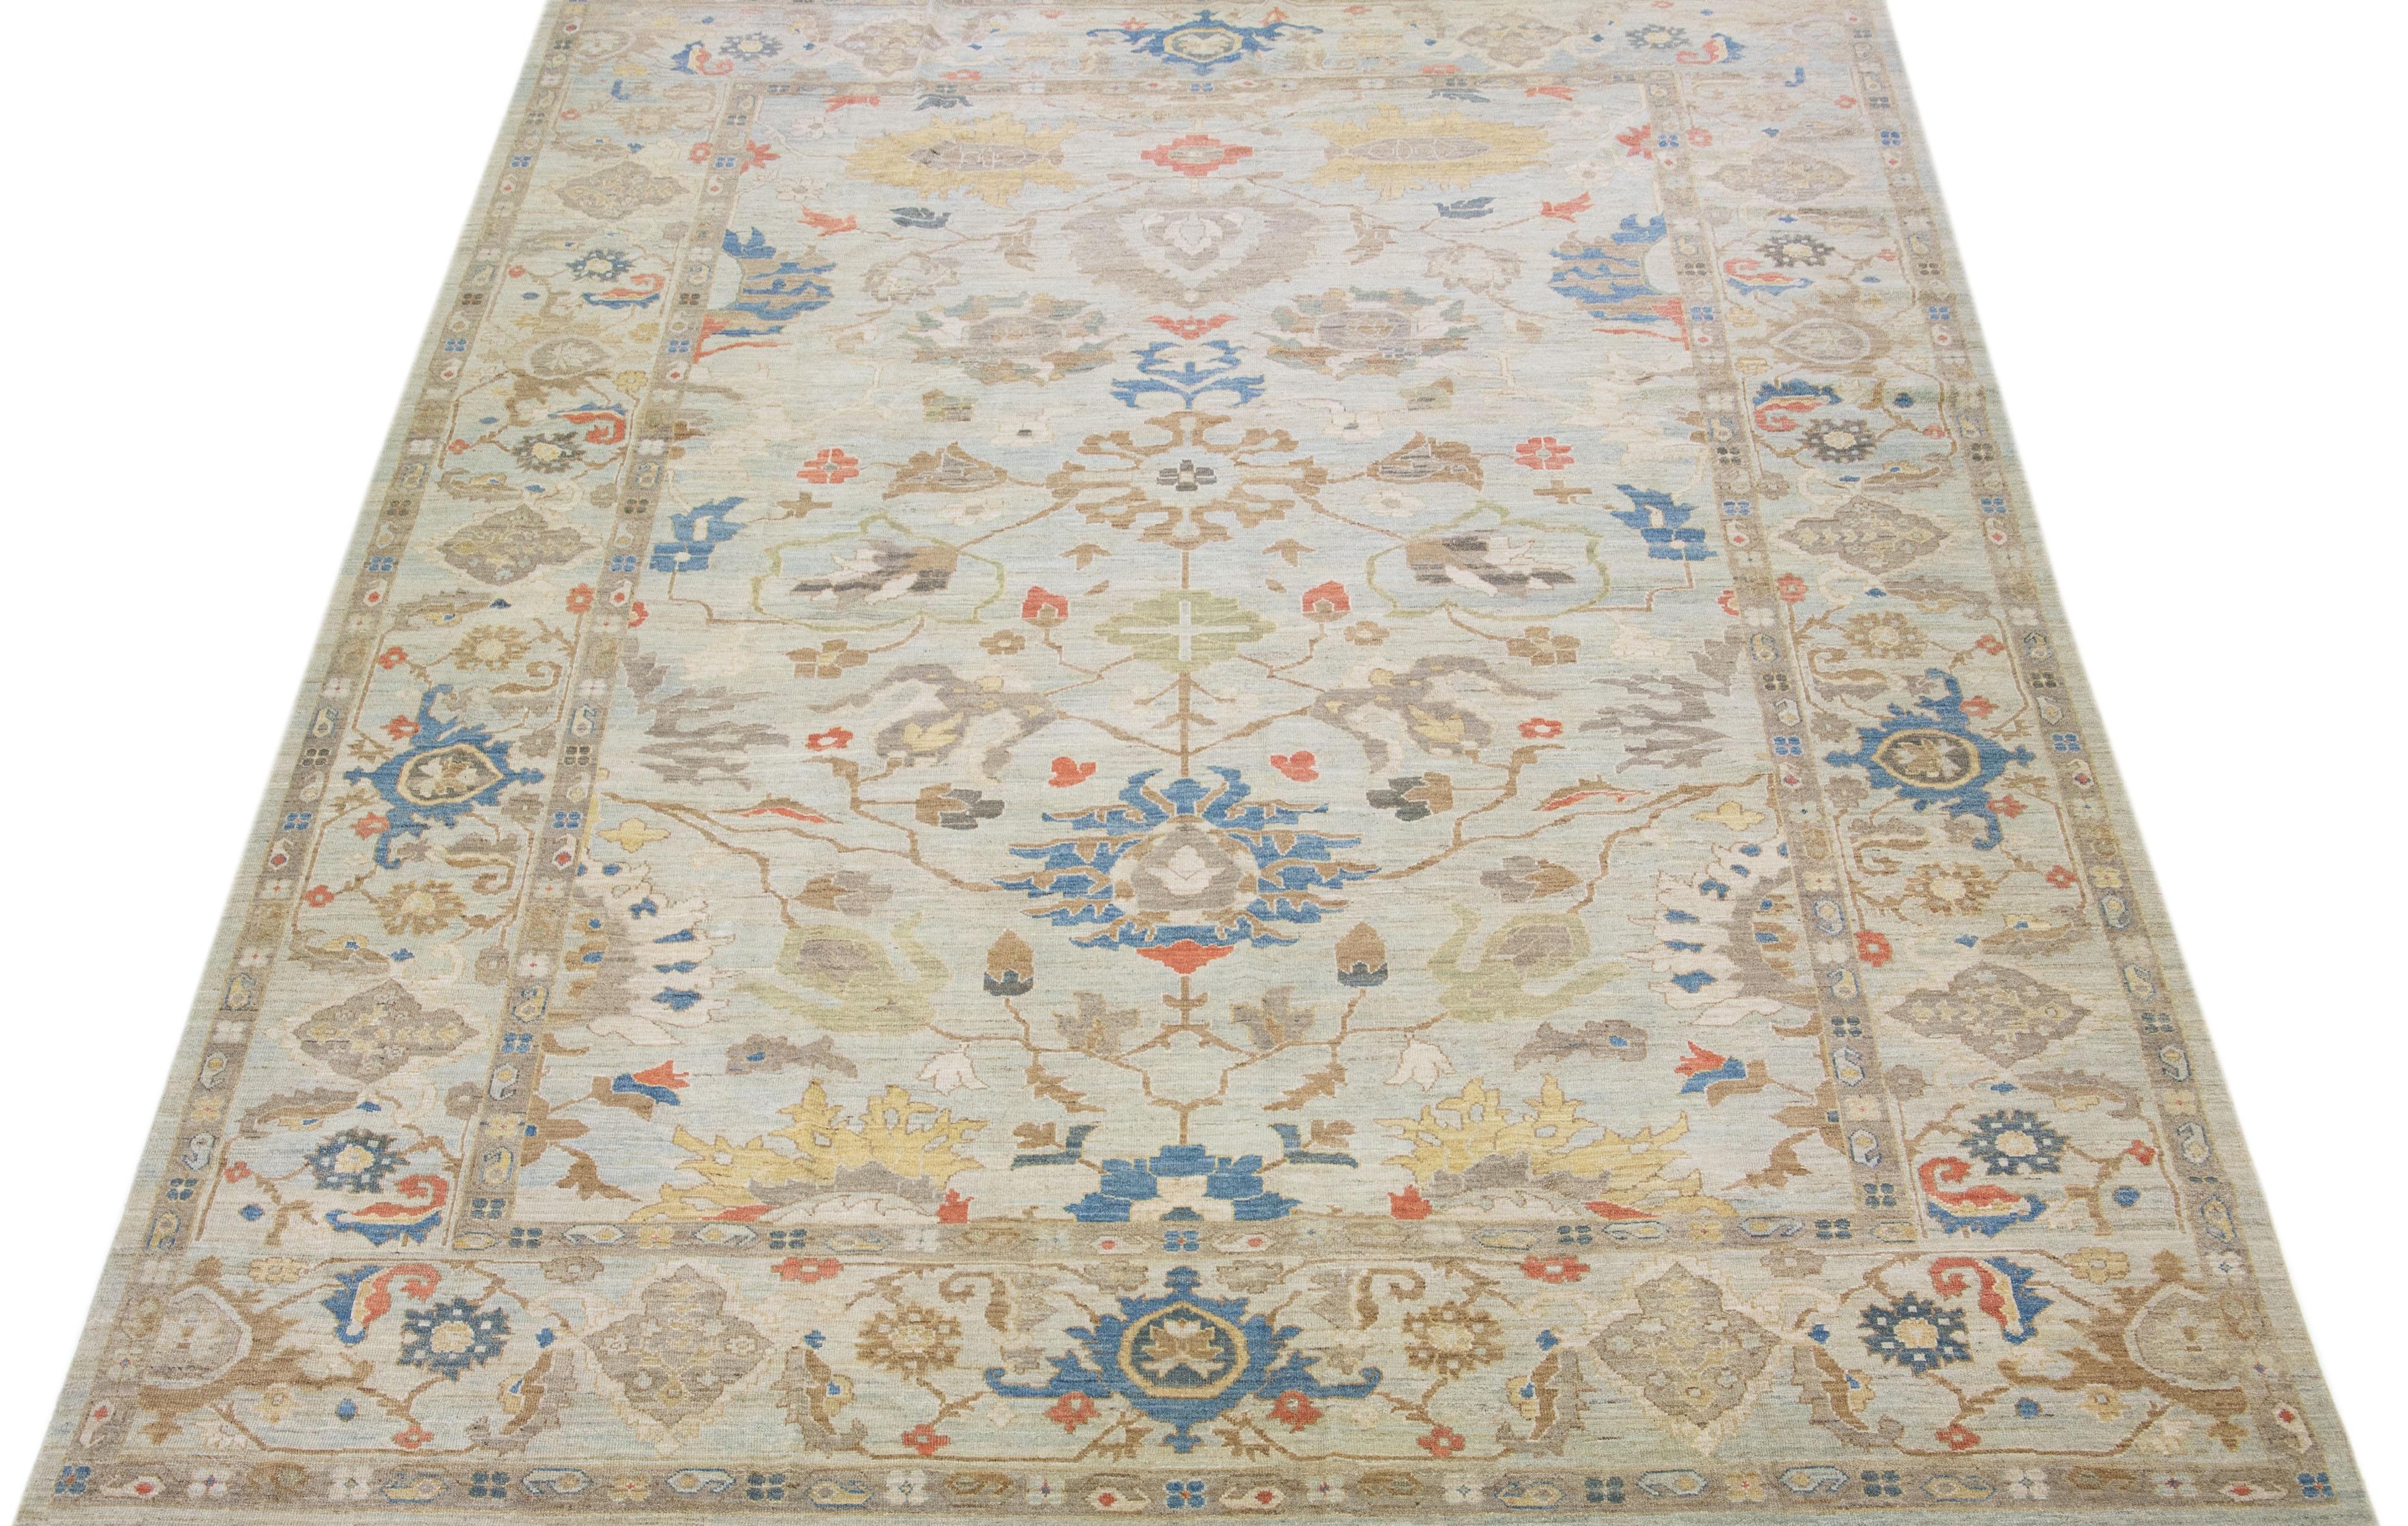 Beautiful modern Sultanabad hand knotted wool rug with a blue color field. This rug has a designed frame with rust, gray, and yellow accents in a gorgeous all-over floral design.

This rug measures: 8'10